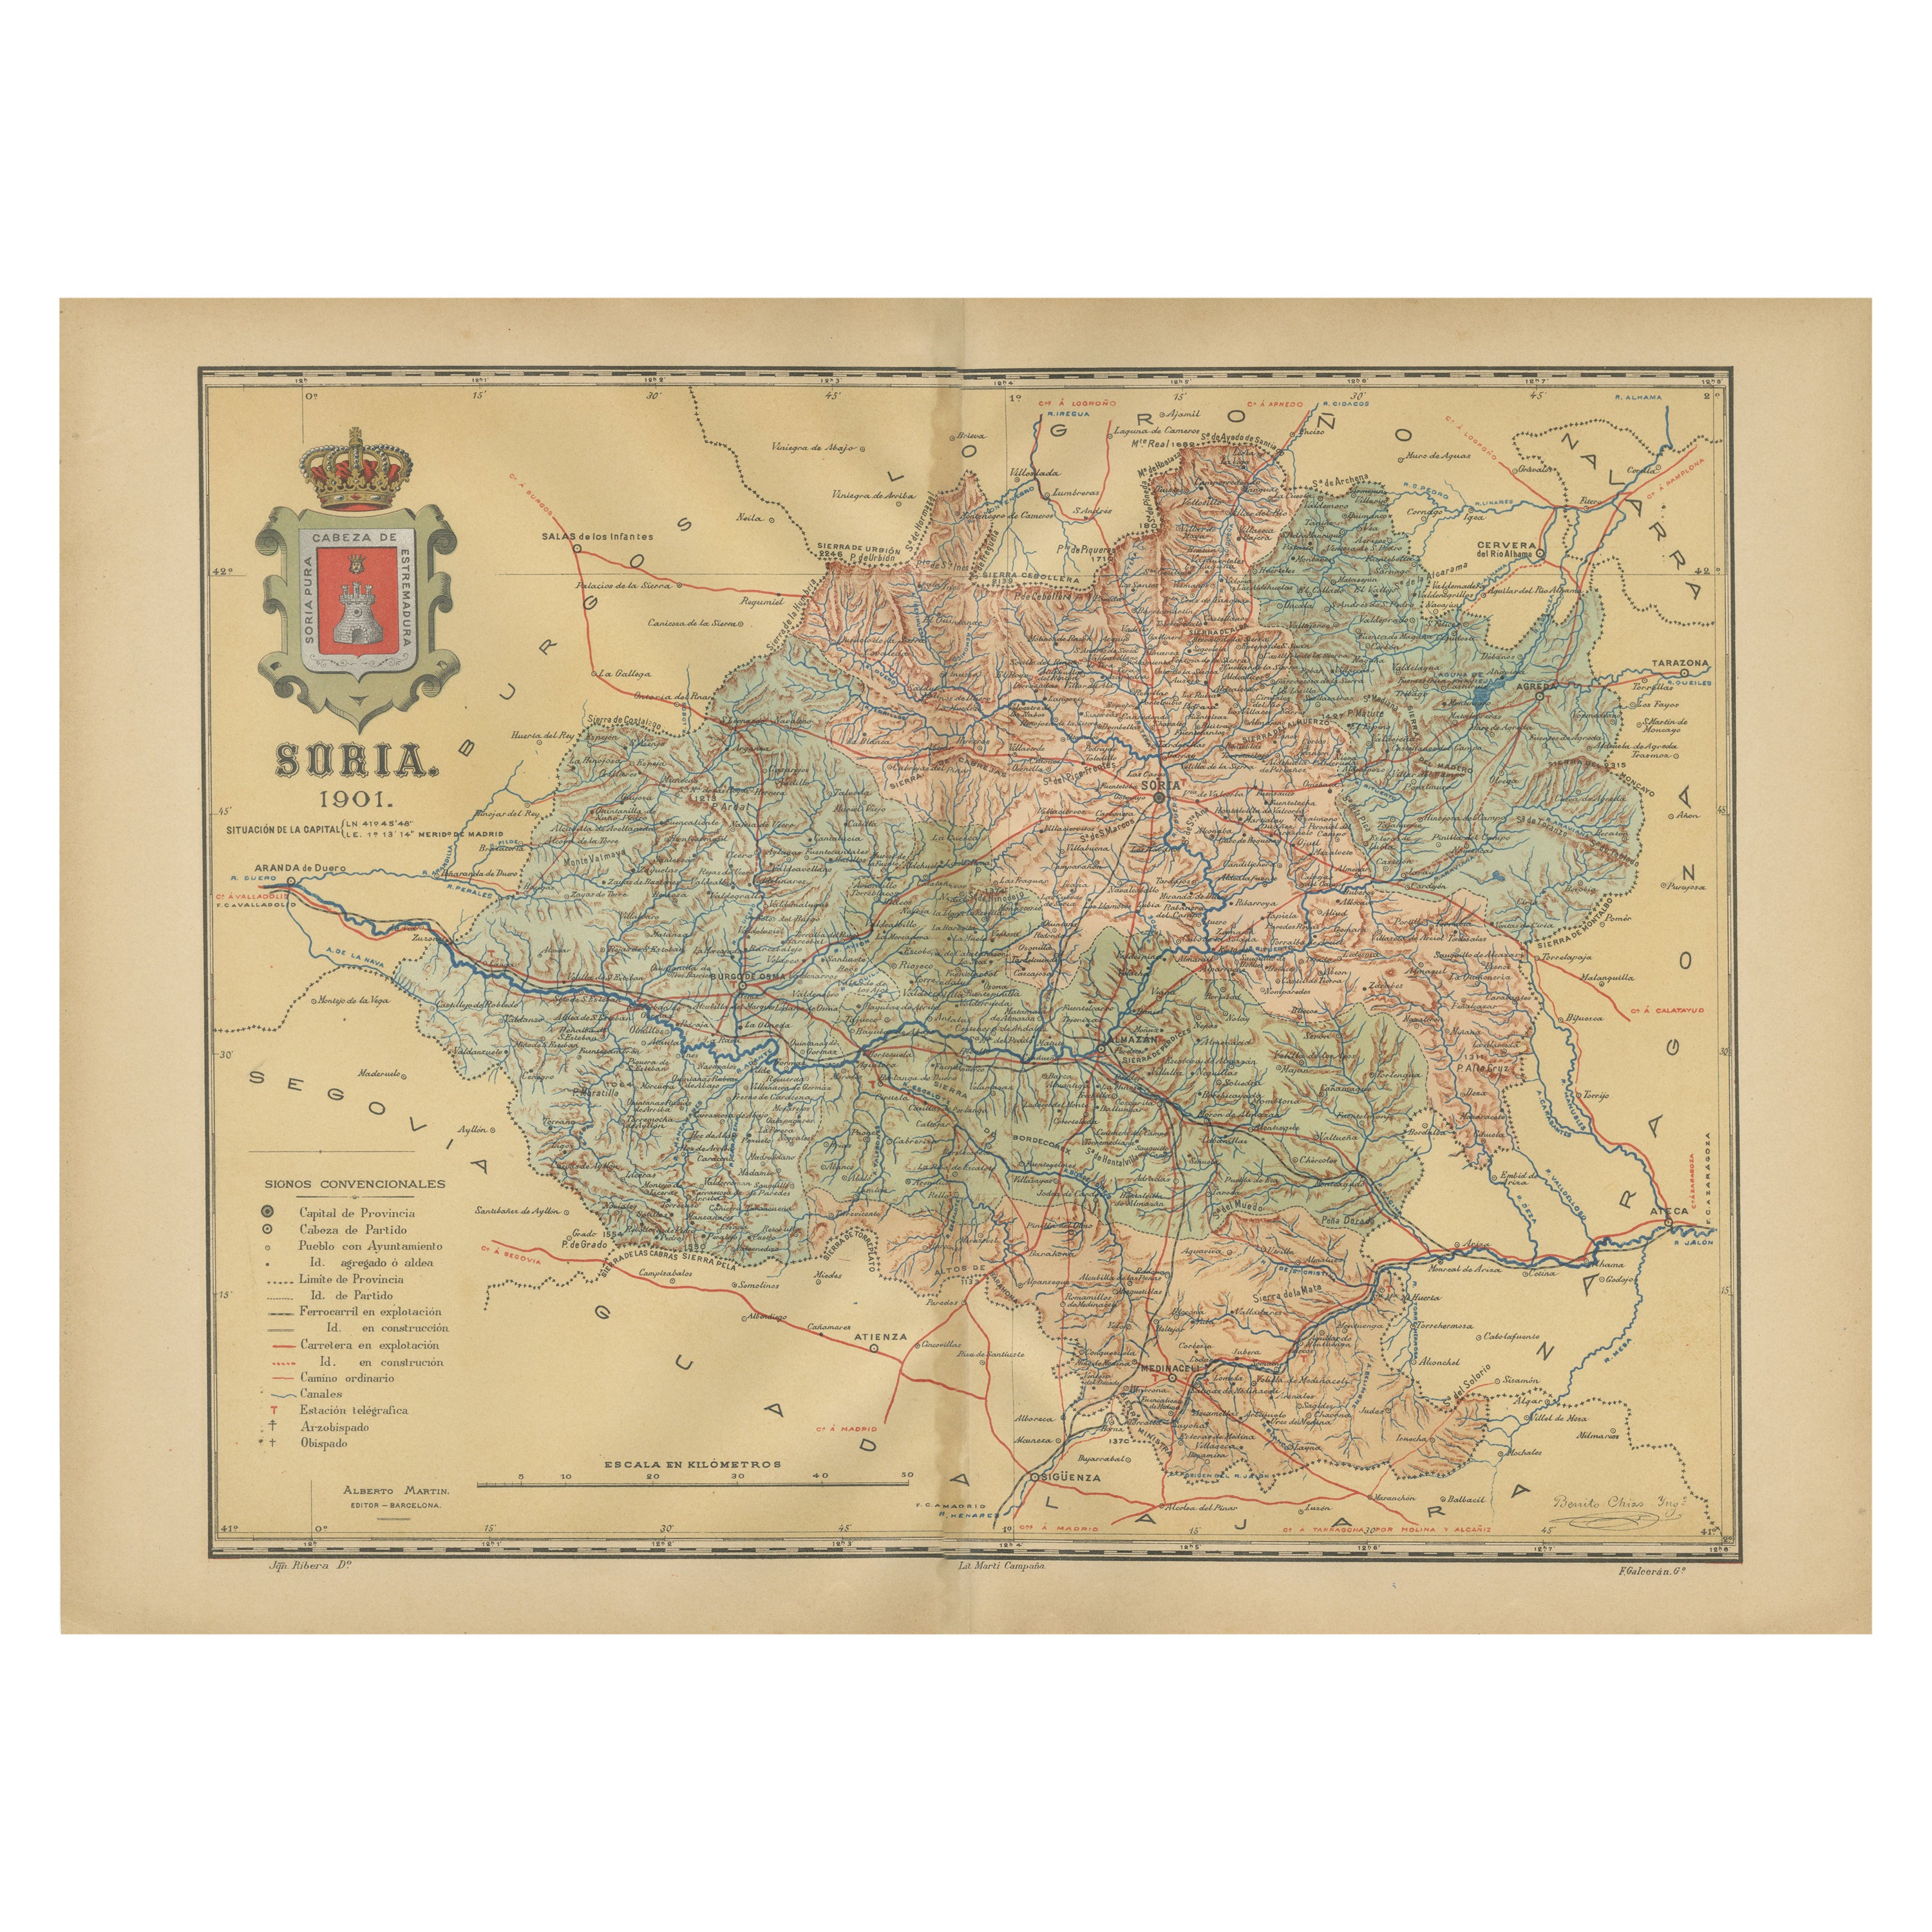 Map of Soria Province, 1901: Detailed Cartography of Northeastern Spain